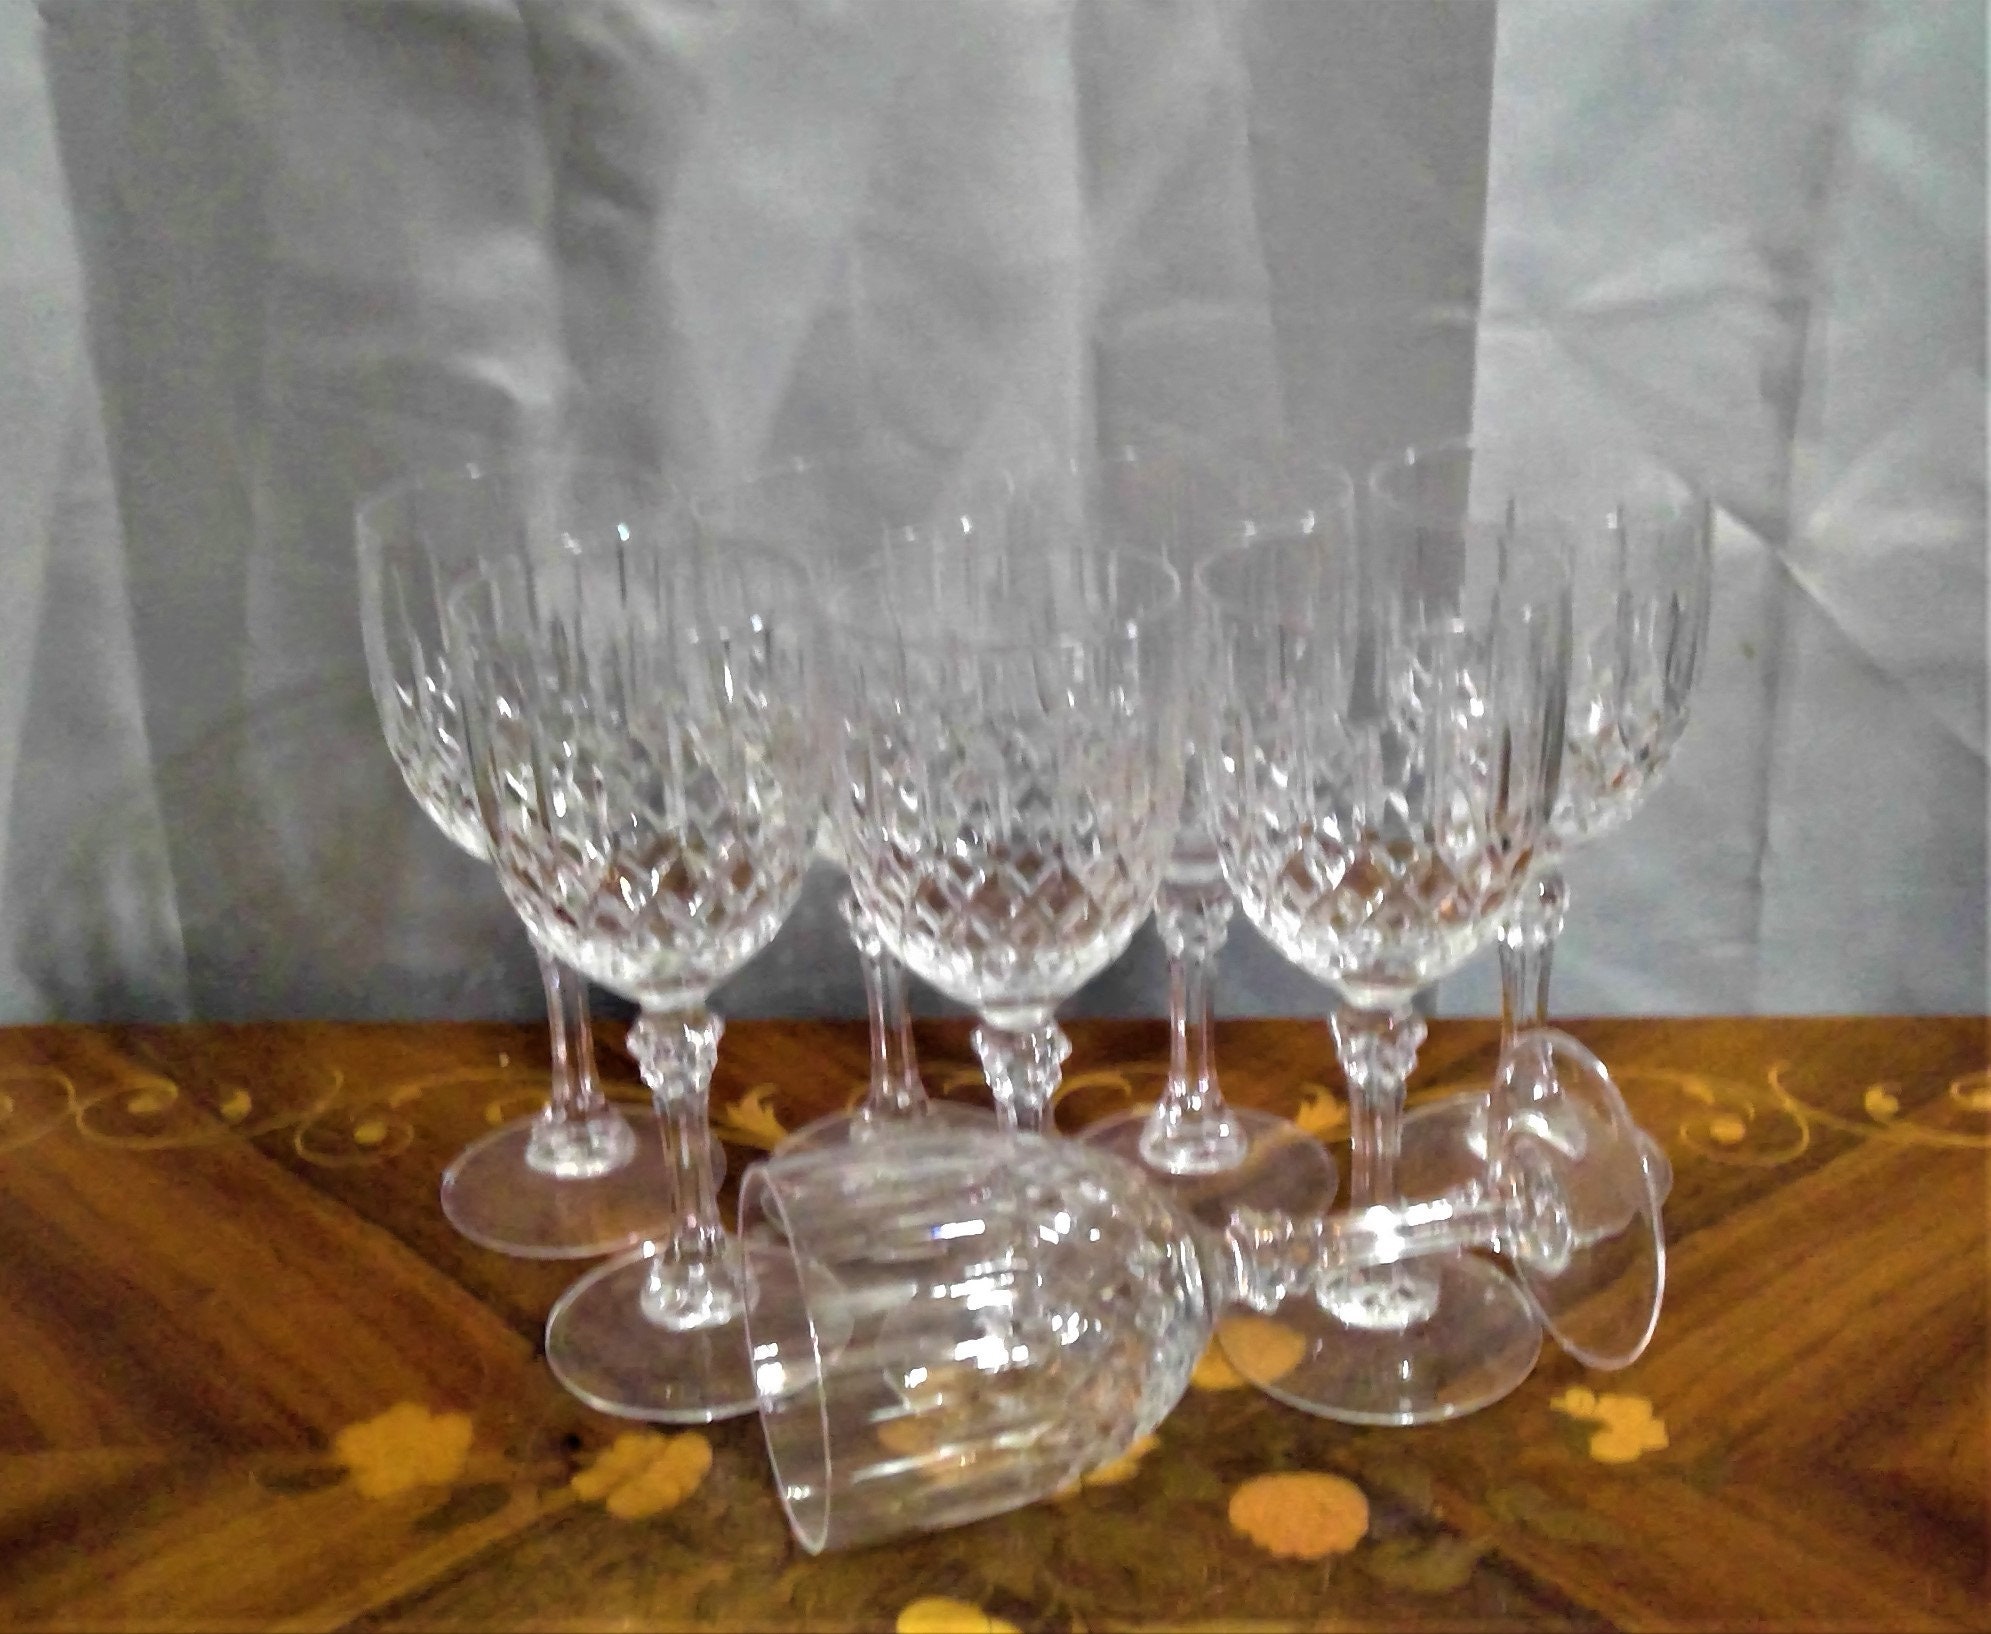 Tiffany Audubon White Wine Glass in Hand-etched Glass